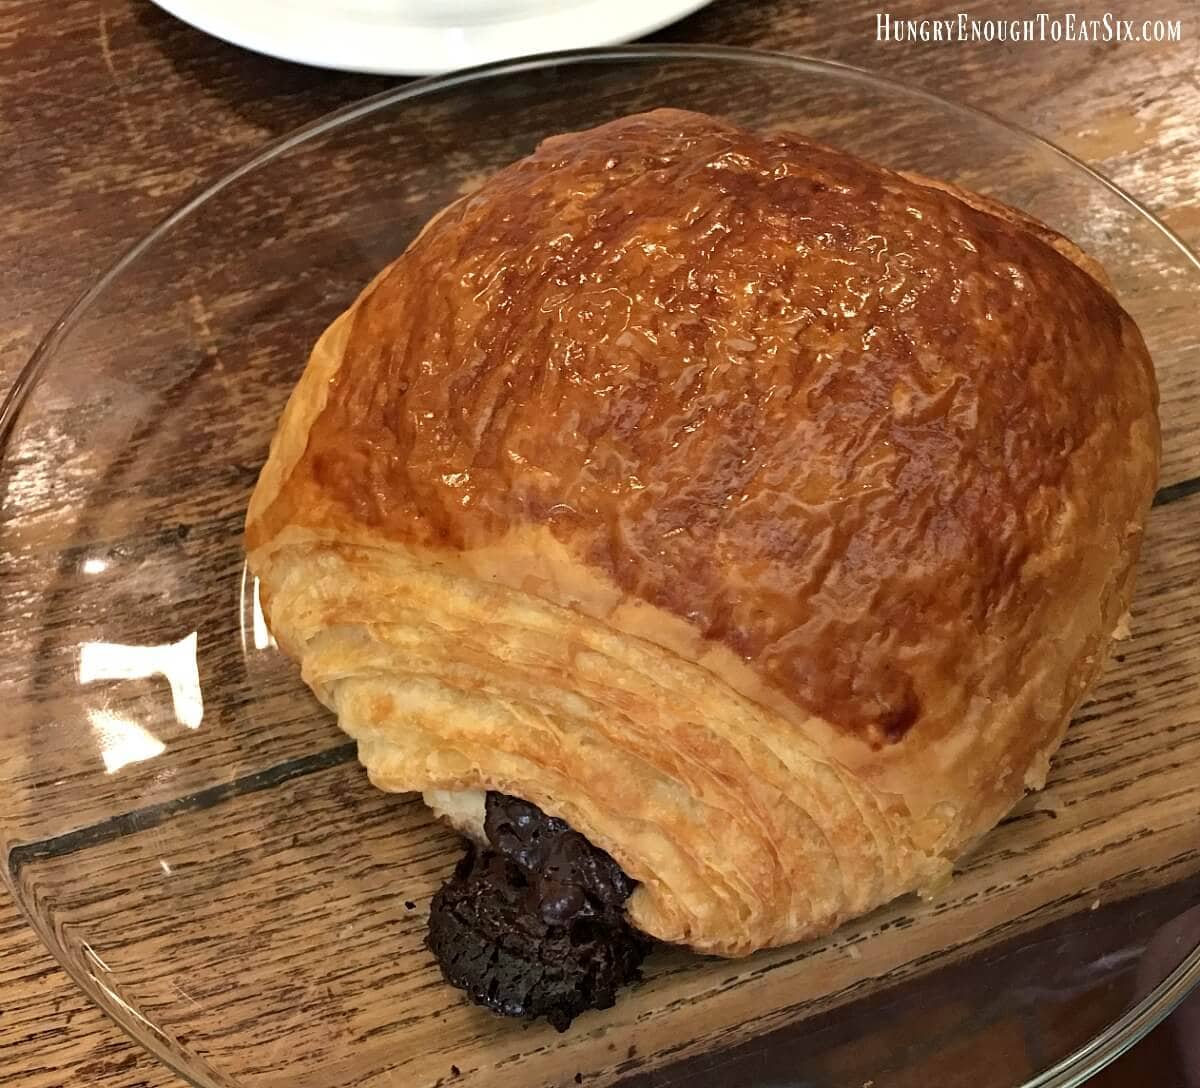 A chocolate-filled croissant with lots of flaky layers and a shiny top.